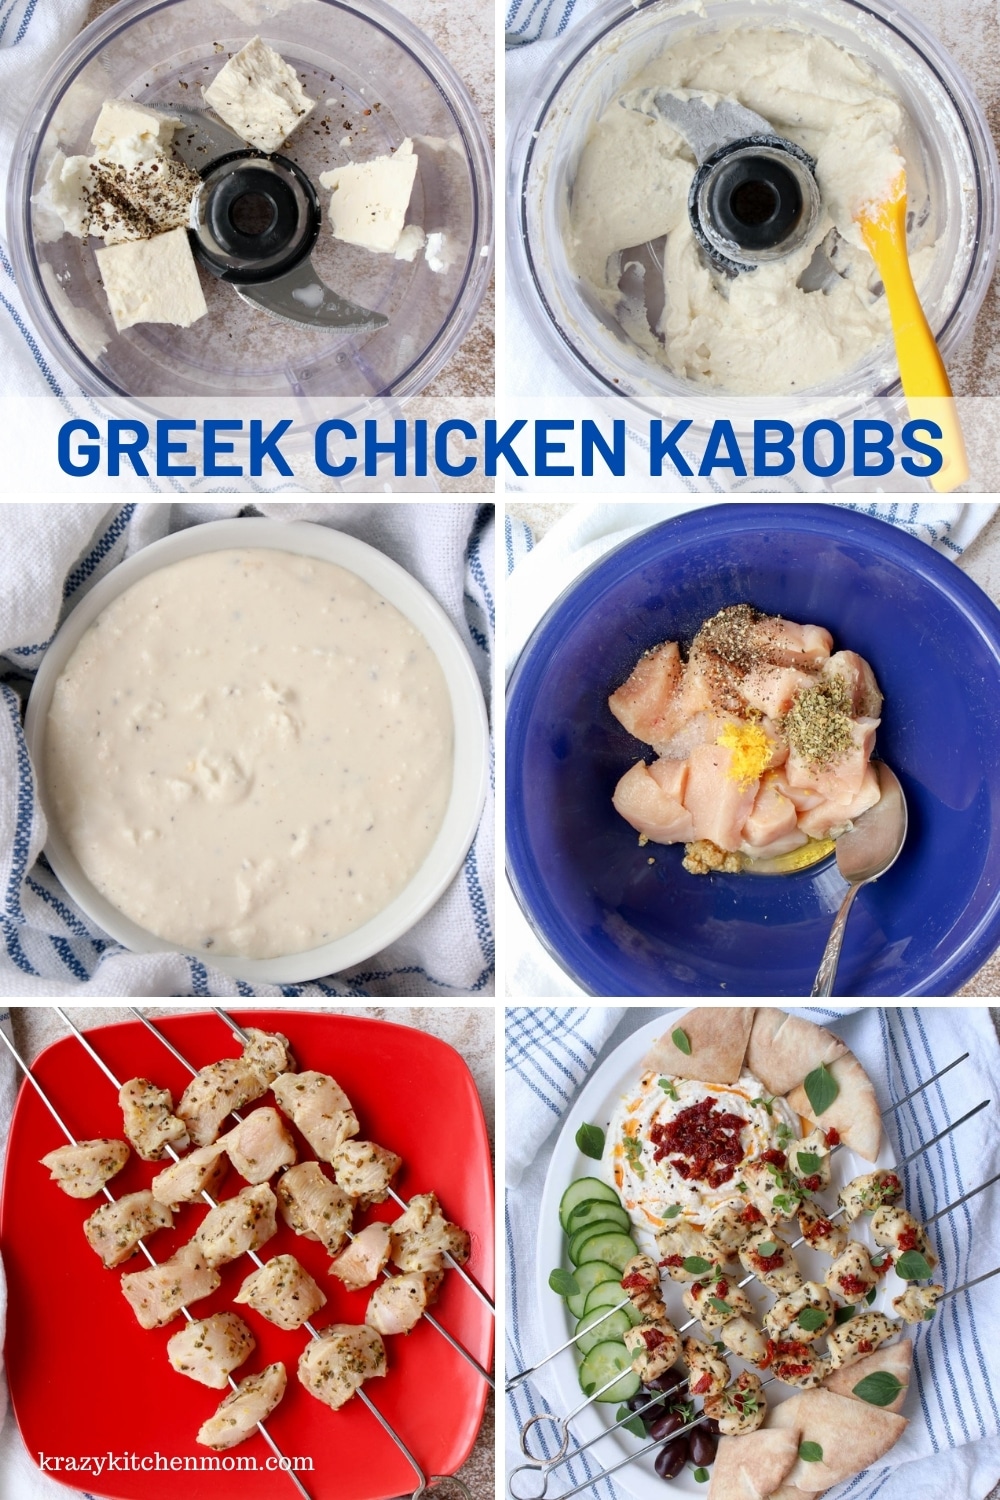 Fire up the grill for our new favorite Greek chicken kabobs. These kabobs are made with a tasty marinade and serve with whipped feta cheese. via @krazykitchenmom